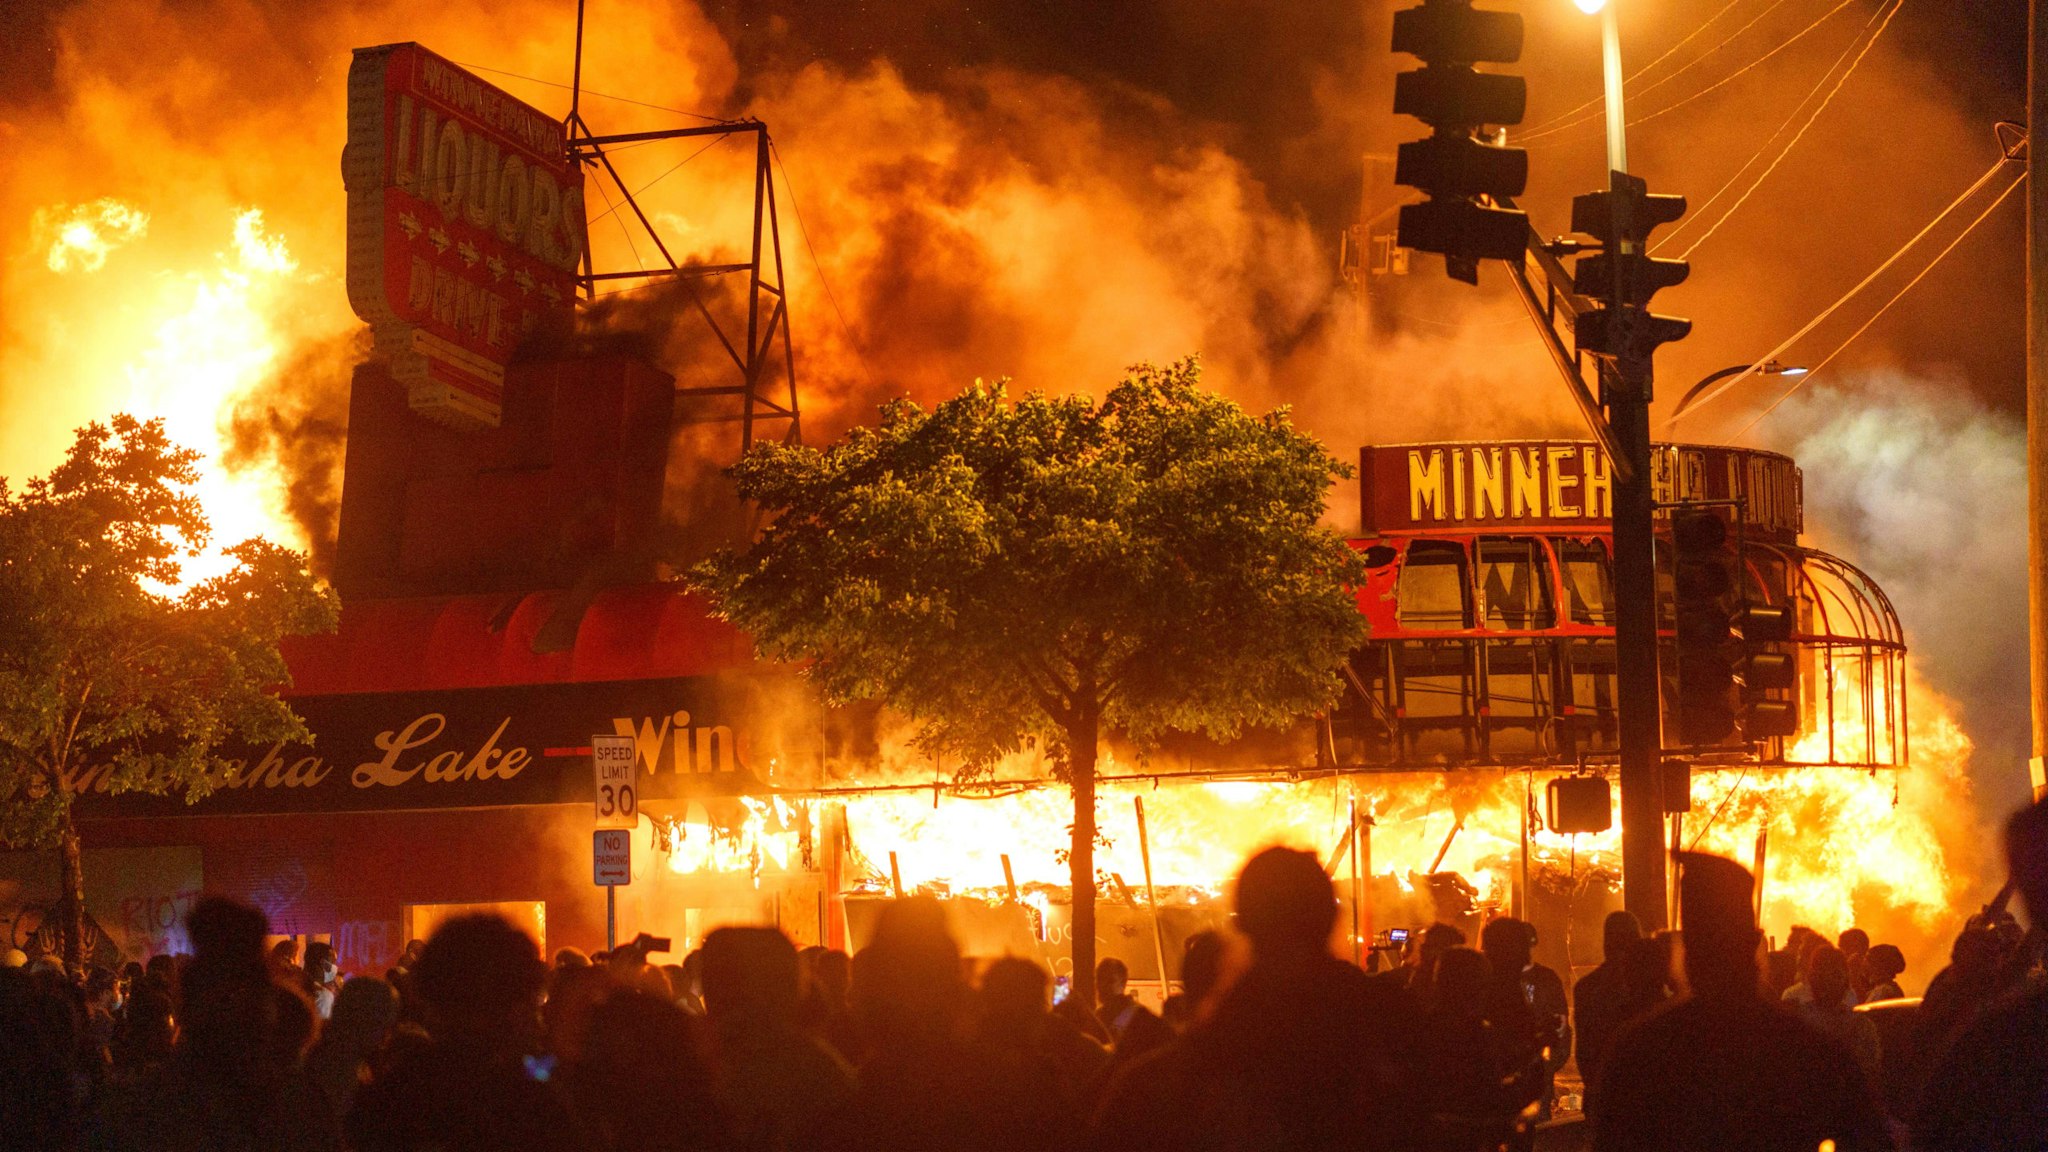 TOPSHOT - Protesters gather in front of a liquor store in flames near the Third Police Precinct on May 28, 2020 in Minneapolis, Minnesota, during a protest over the death of George Floyd, an unarmed black man, who died after a police officer kneeled on his neck for several minutes. - A police precinct in Minnesota went up in flames late on May 28 in a third day of demonstrations as the so-called Twin Cities of Minneapolis and St. Paul seethed over the shocking police killing of a handcuffed black man. The precinct, which police had abandoned, burned after a group of protesters pushed through barriers around the building, breaking windows and chanting slogans. A much larger crowd demonstrated as the building went up in flames.